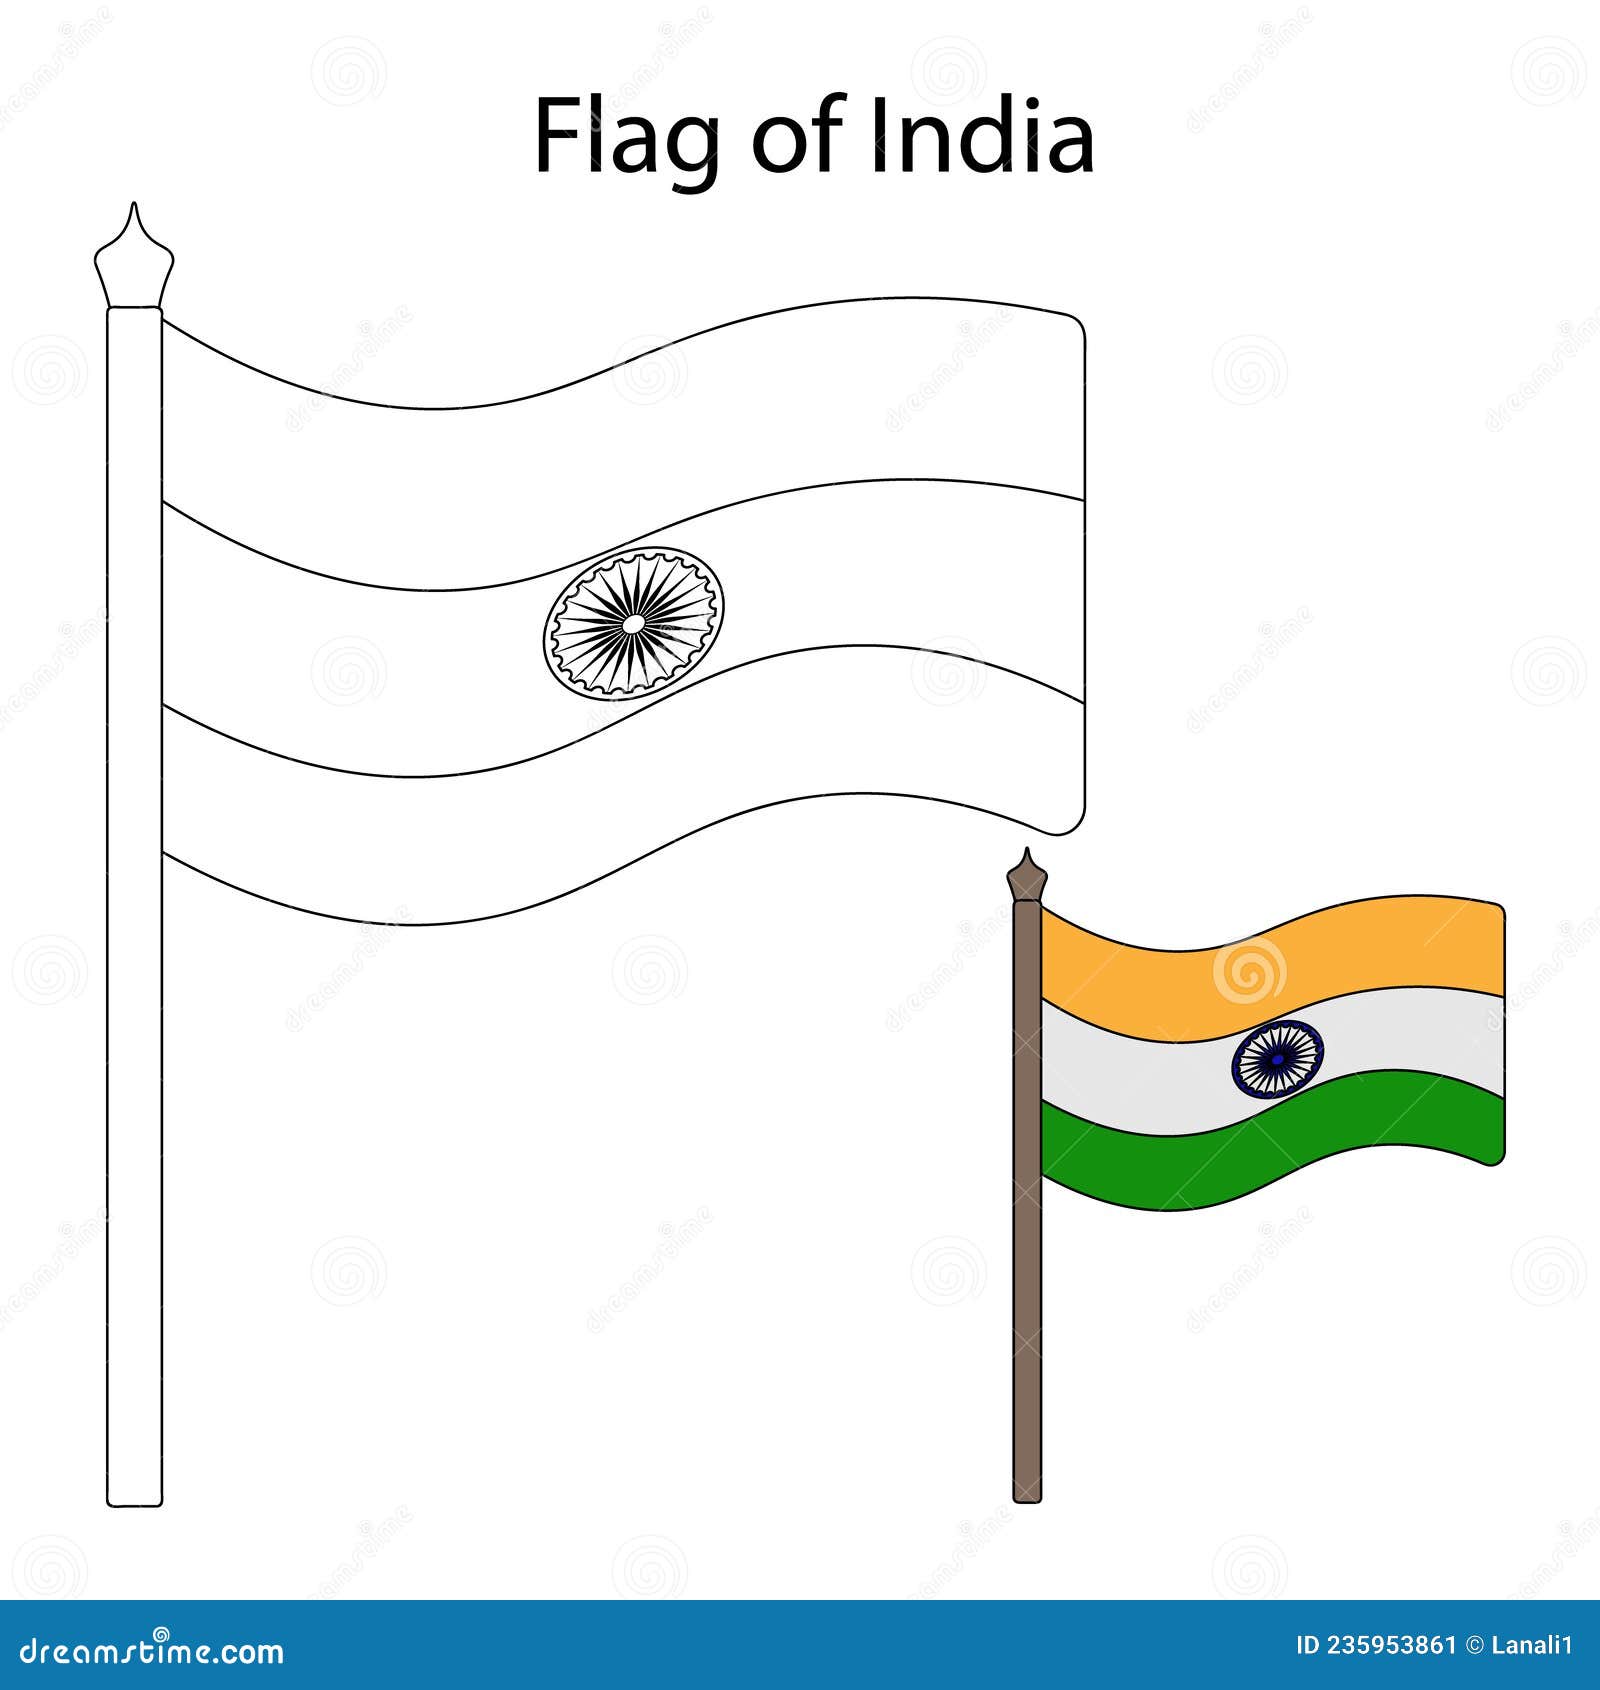 How to draw national flag of india step by step for Beginners | Indian flag  drawing | Drawing video | Flag drawing, Indian flag, Flag painting